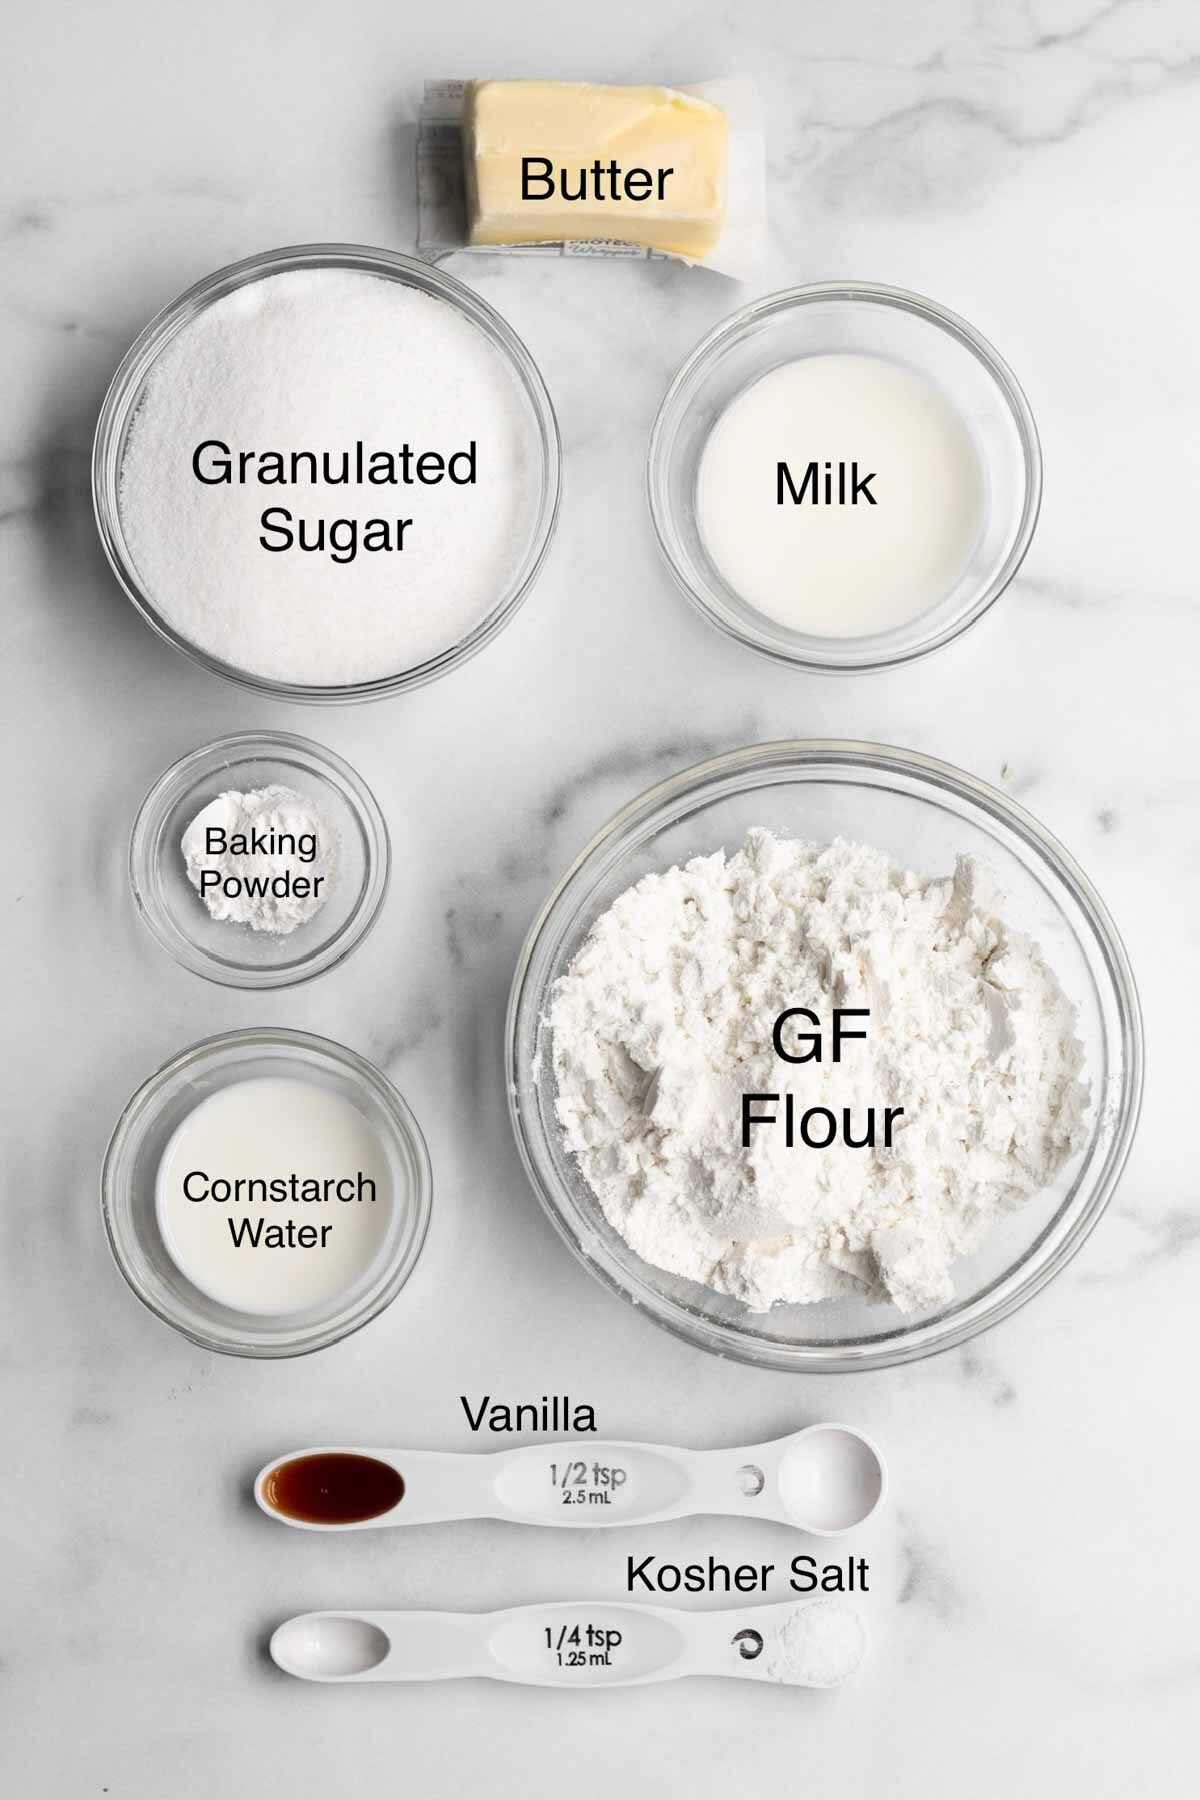 The ingredients in separate containers with their names in text.